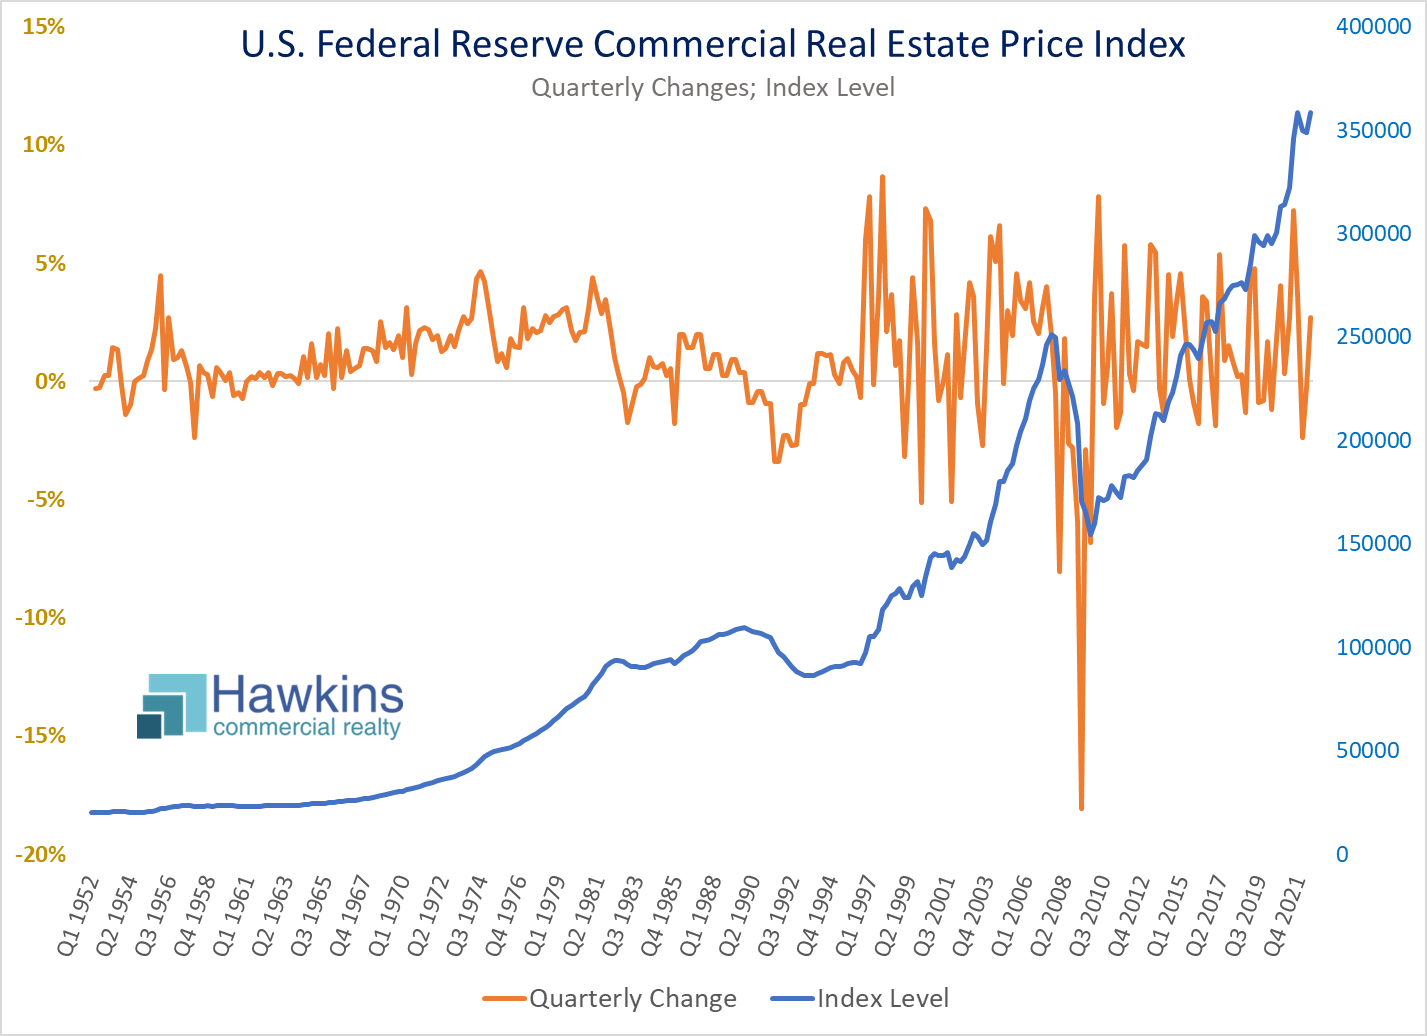 Board of Governors of the Federal Reserve System (US), Interest Rates and Price Indexes; Commercial Real Estate Price Index, Level [BOGZ1FL075035503Q], index levels retrieved from FRED, Federal Reserve Bank of St. Louis; https://fred.stlouisfed.org/series/BOGZ1FL075035503Q, January 16, 2023.